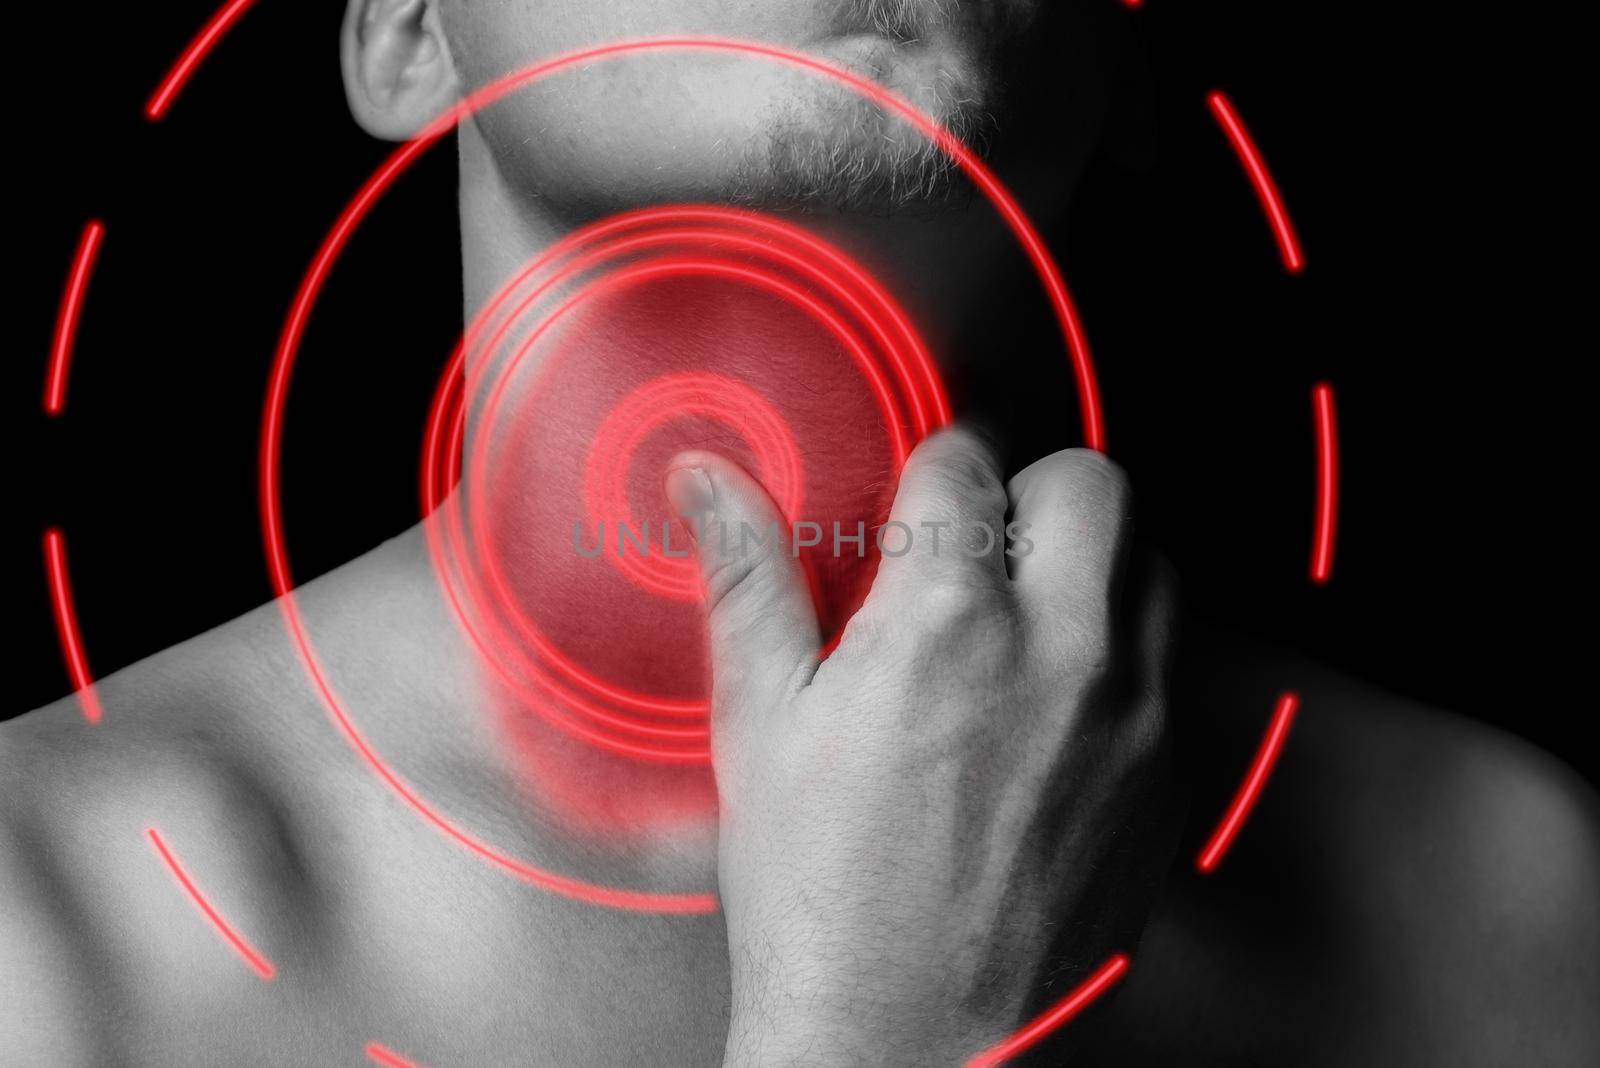 Man holds the throat, sore throat, monochrome image, pain area of red color